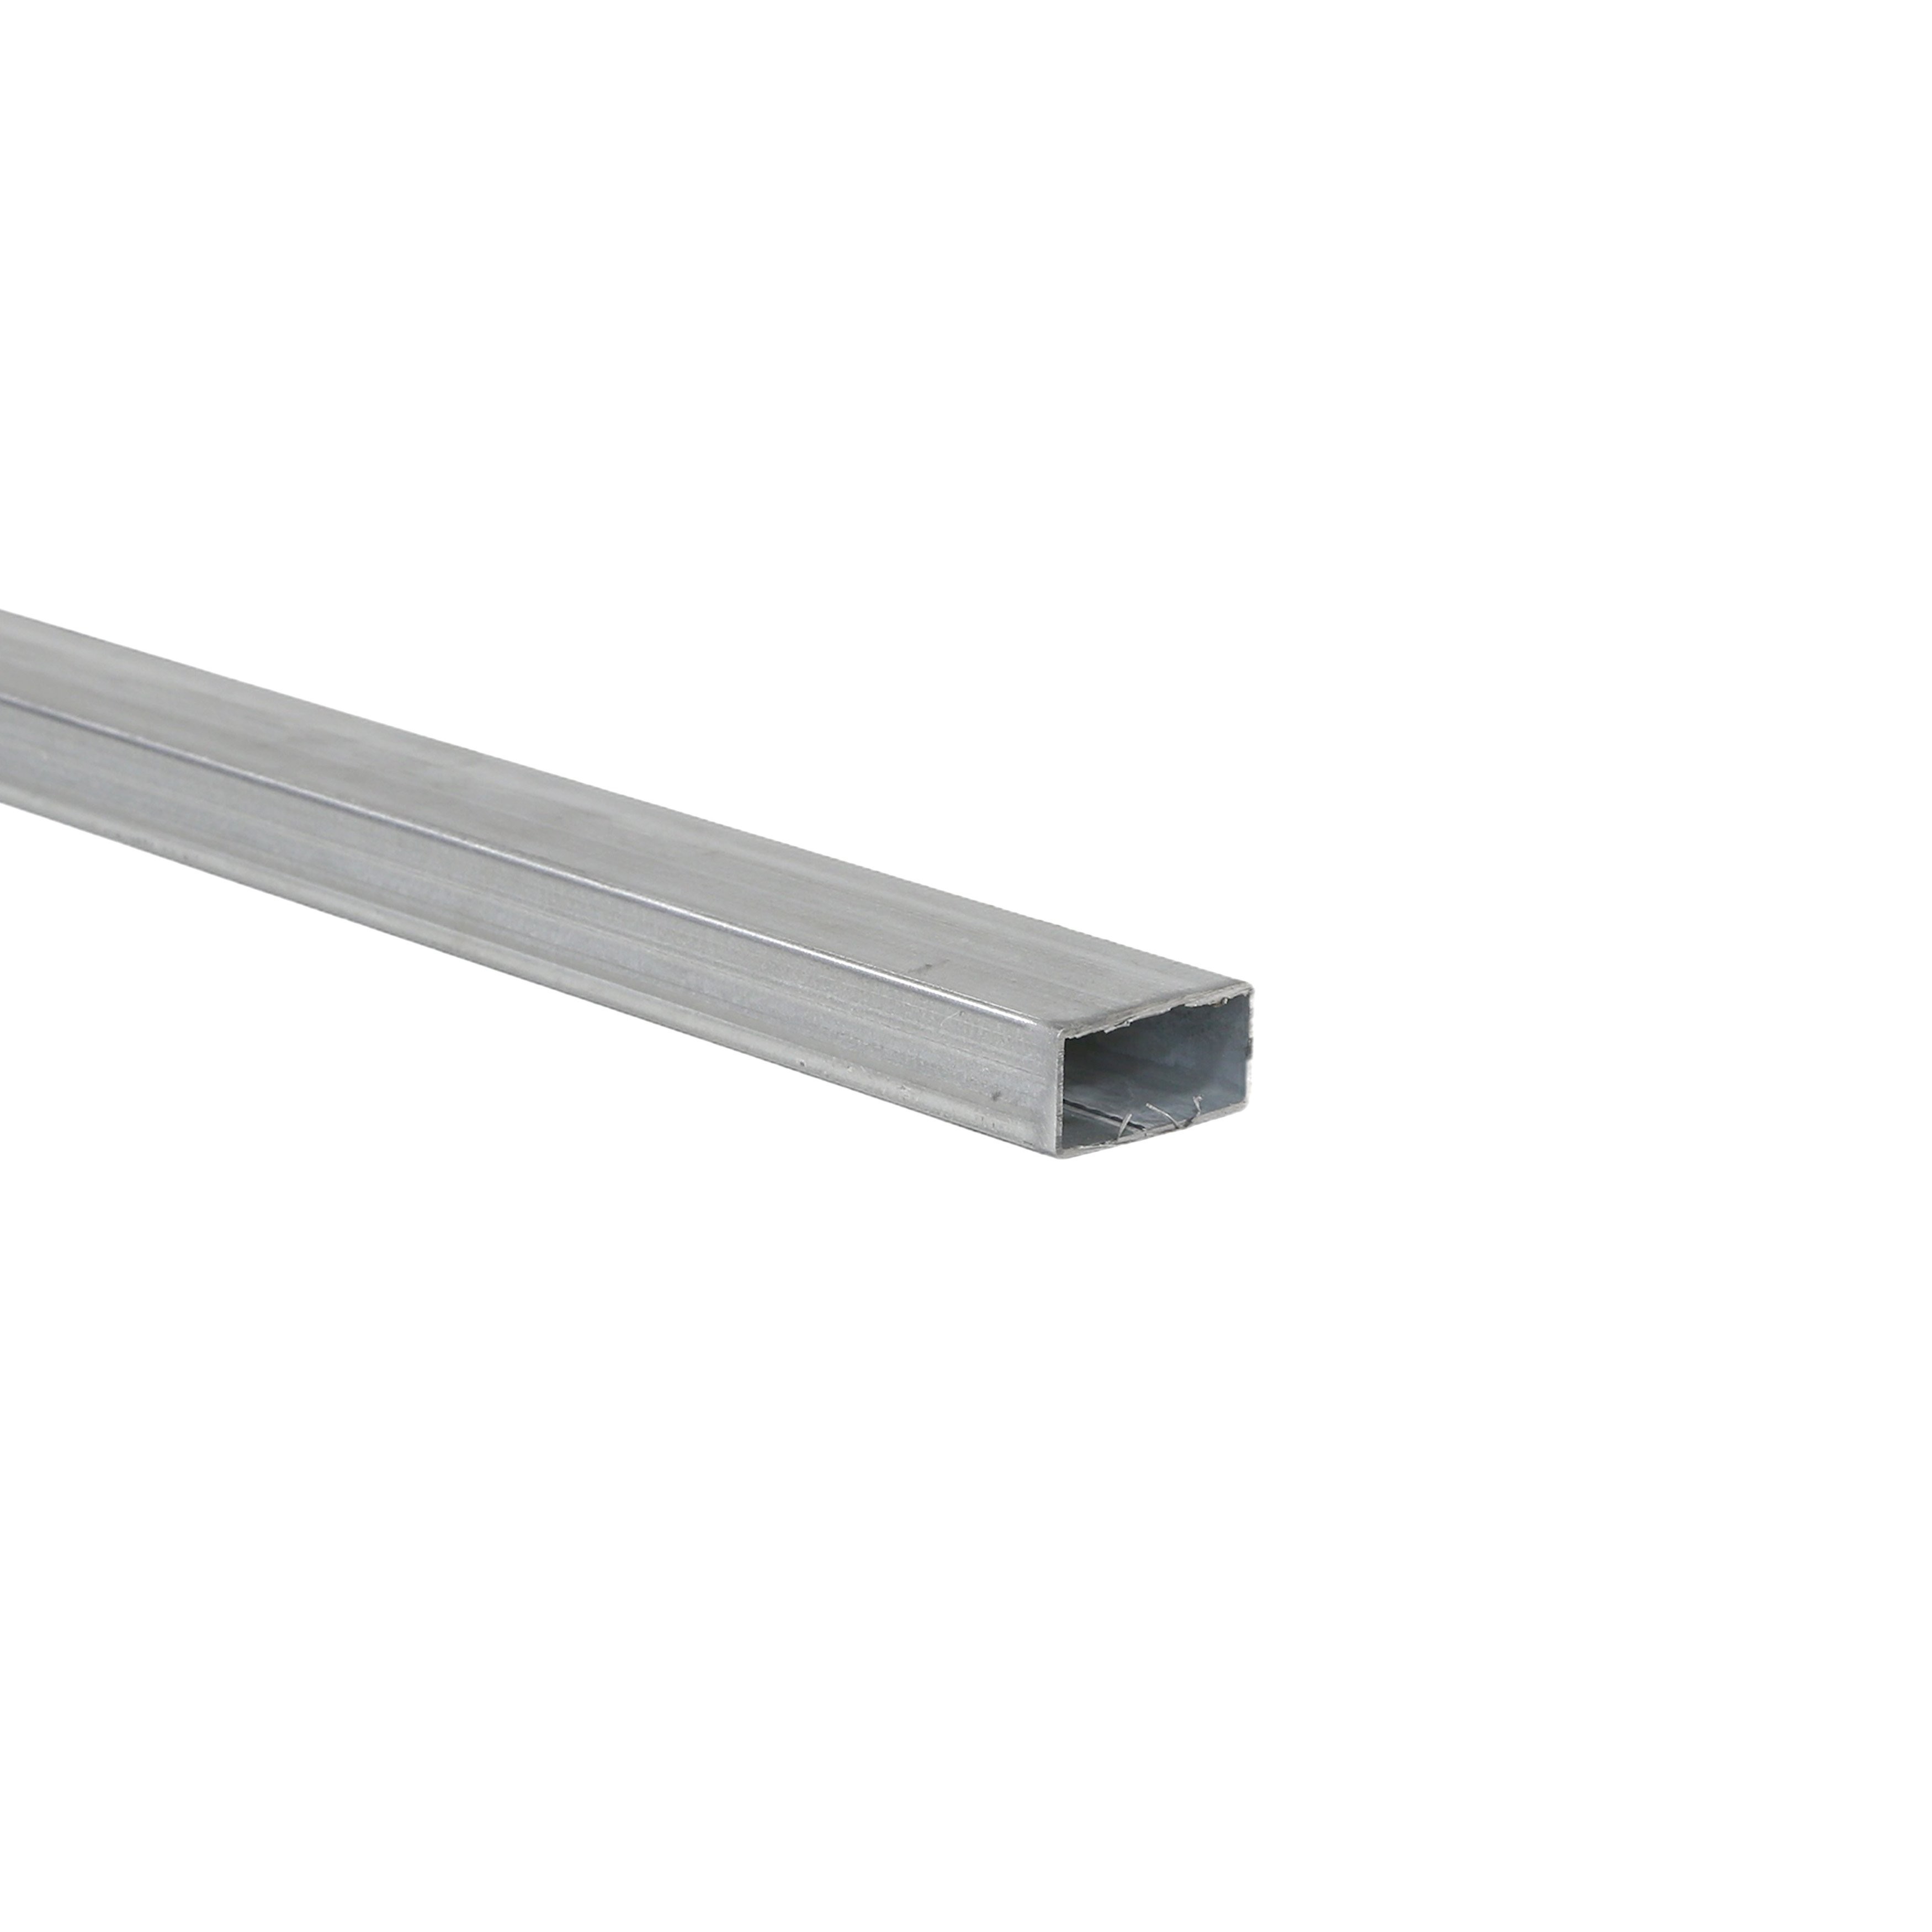 4' Long x 1 x 2 Galvanized Steel Tubing (0.0625 Wall) - Square Steel Pipe